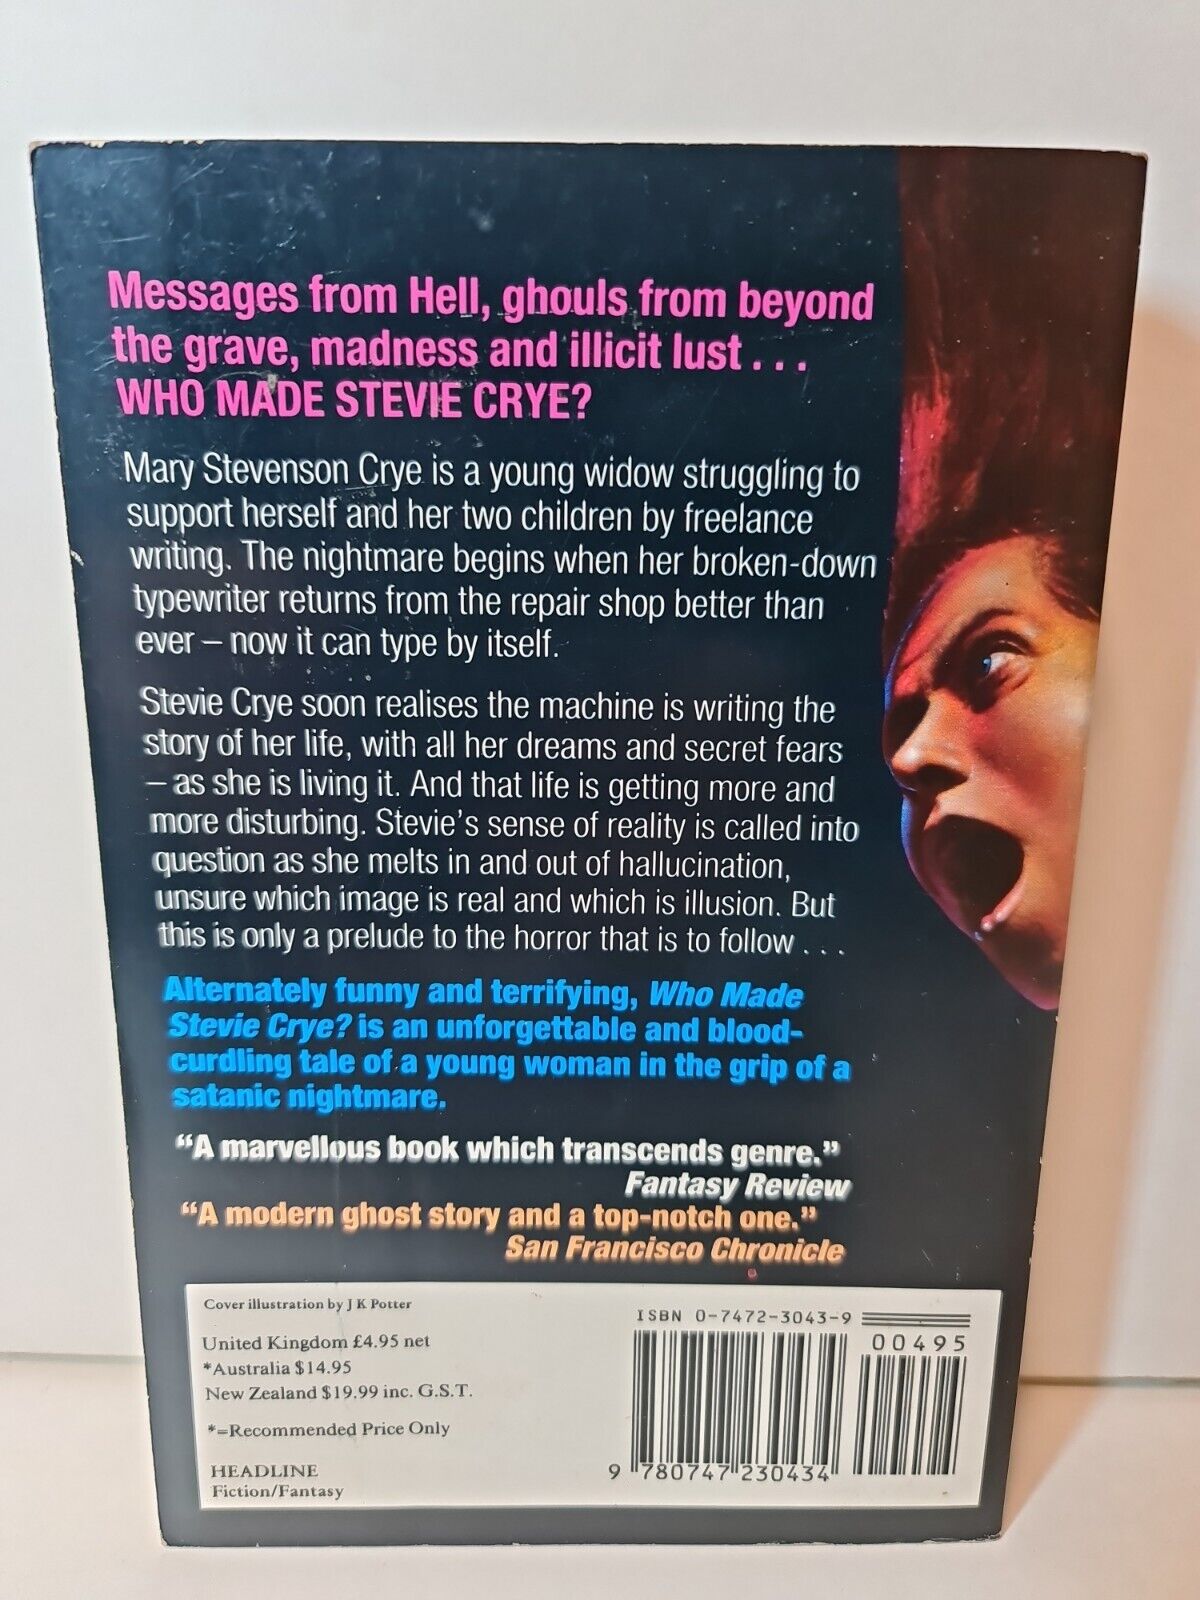 Who Made Stevie Crye? by Michael Bishop (1987)